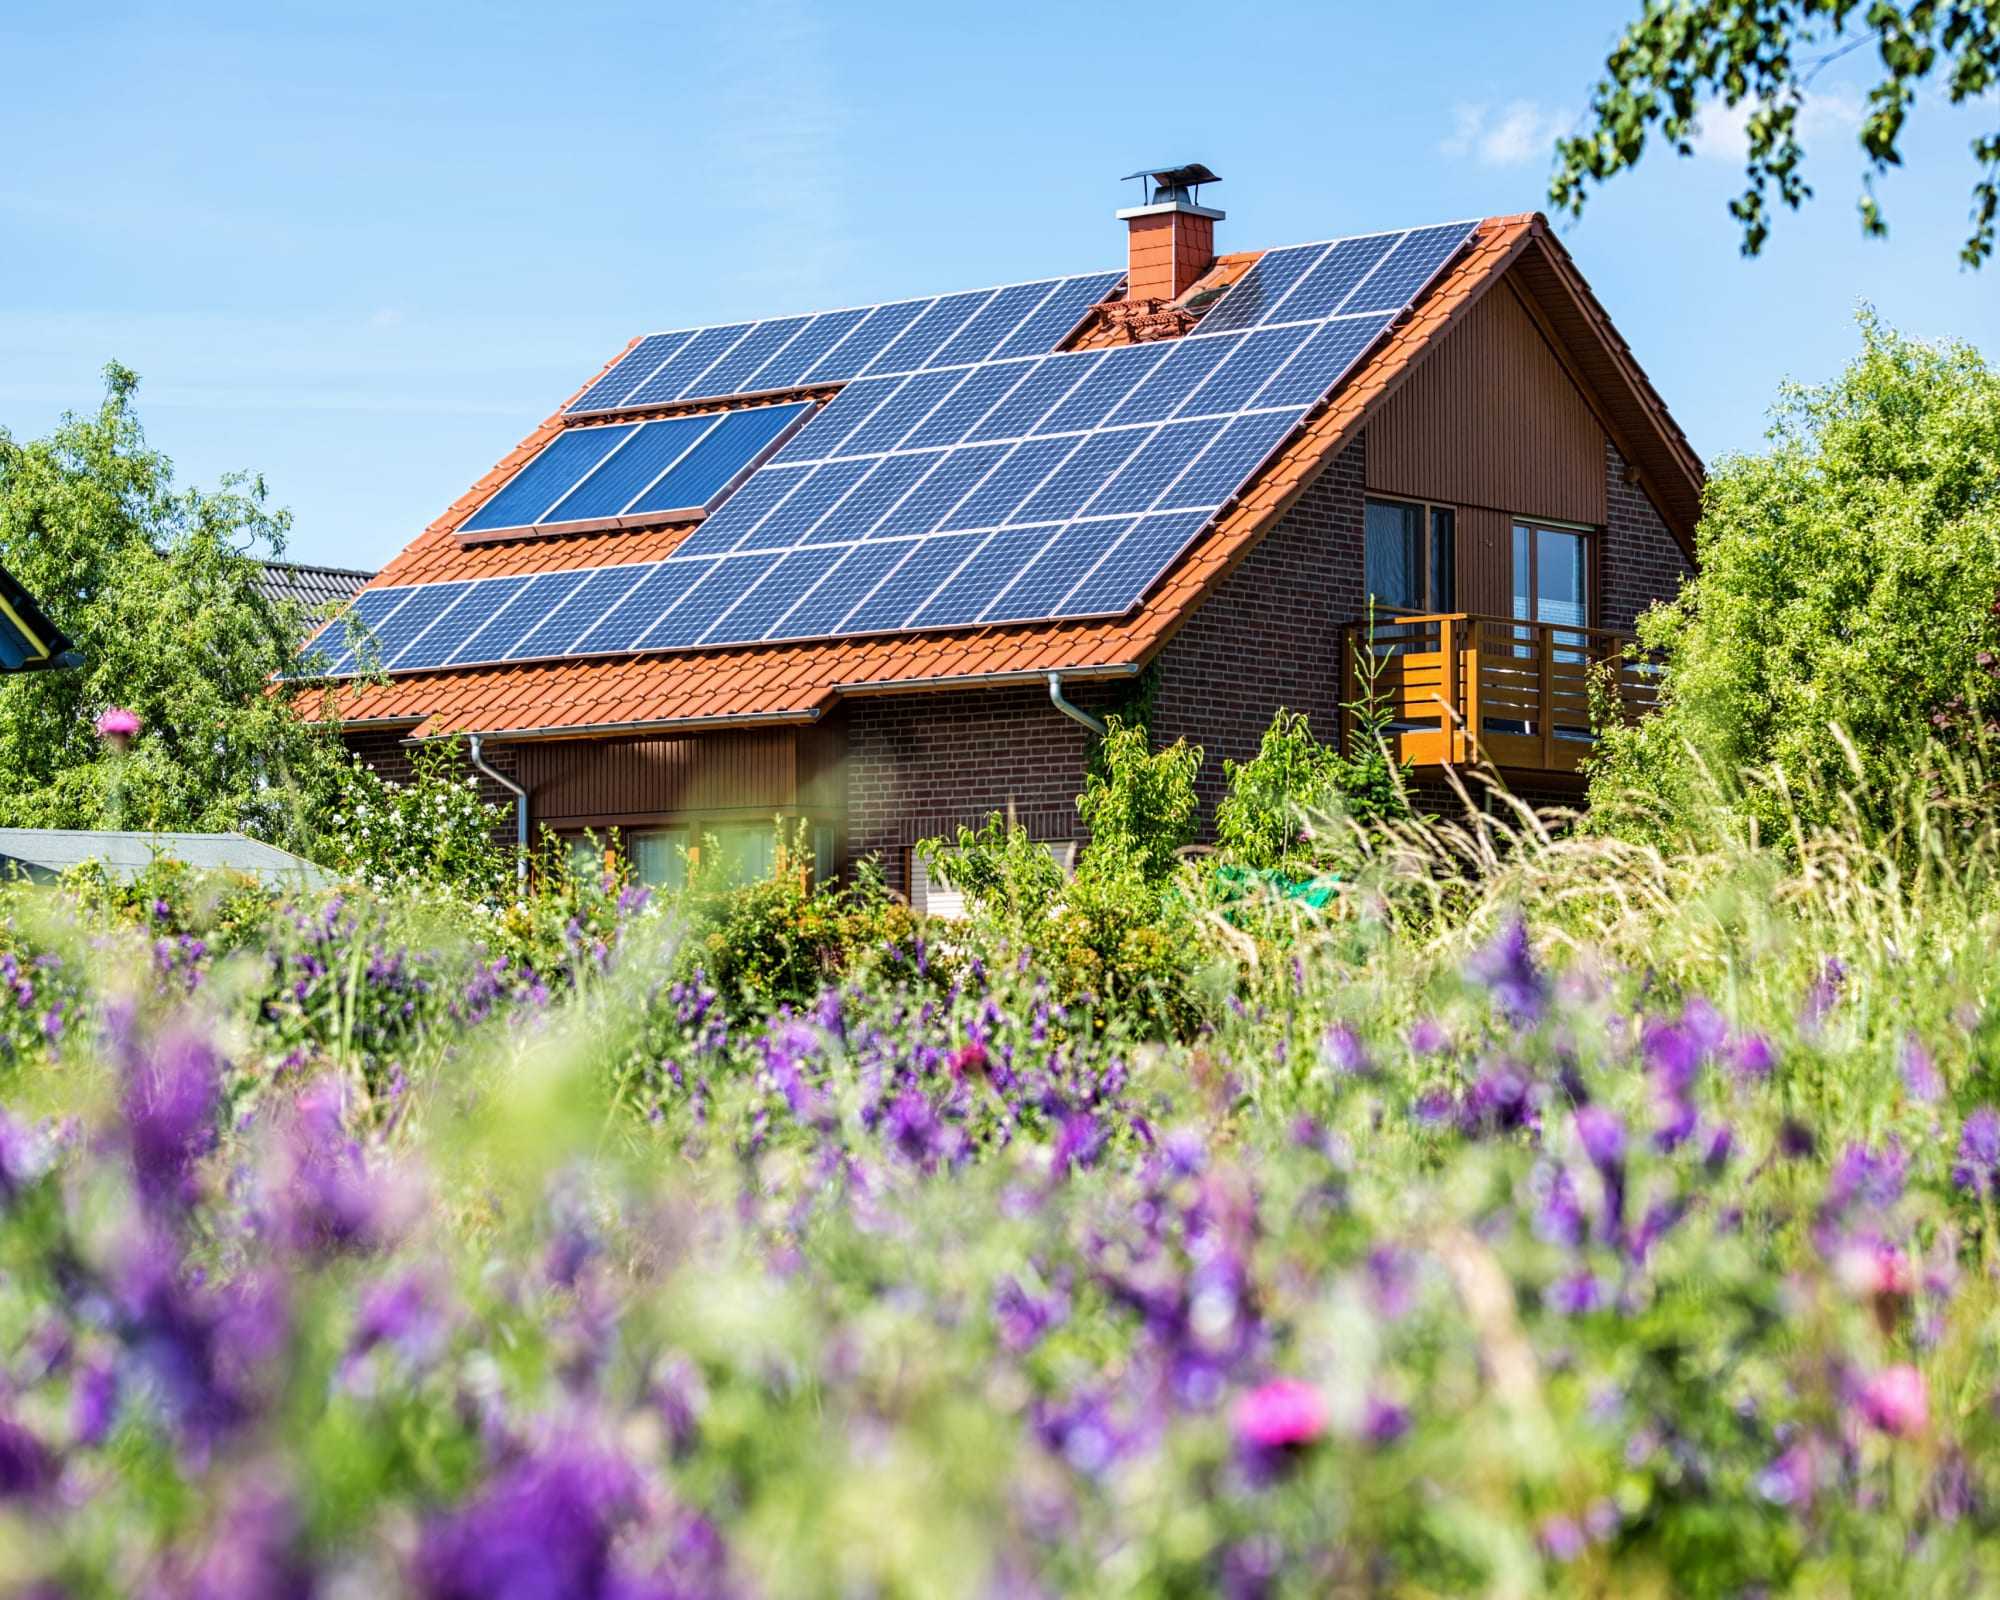 House in countryside with solar panels.